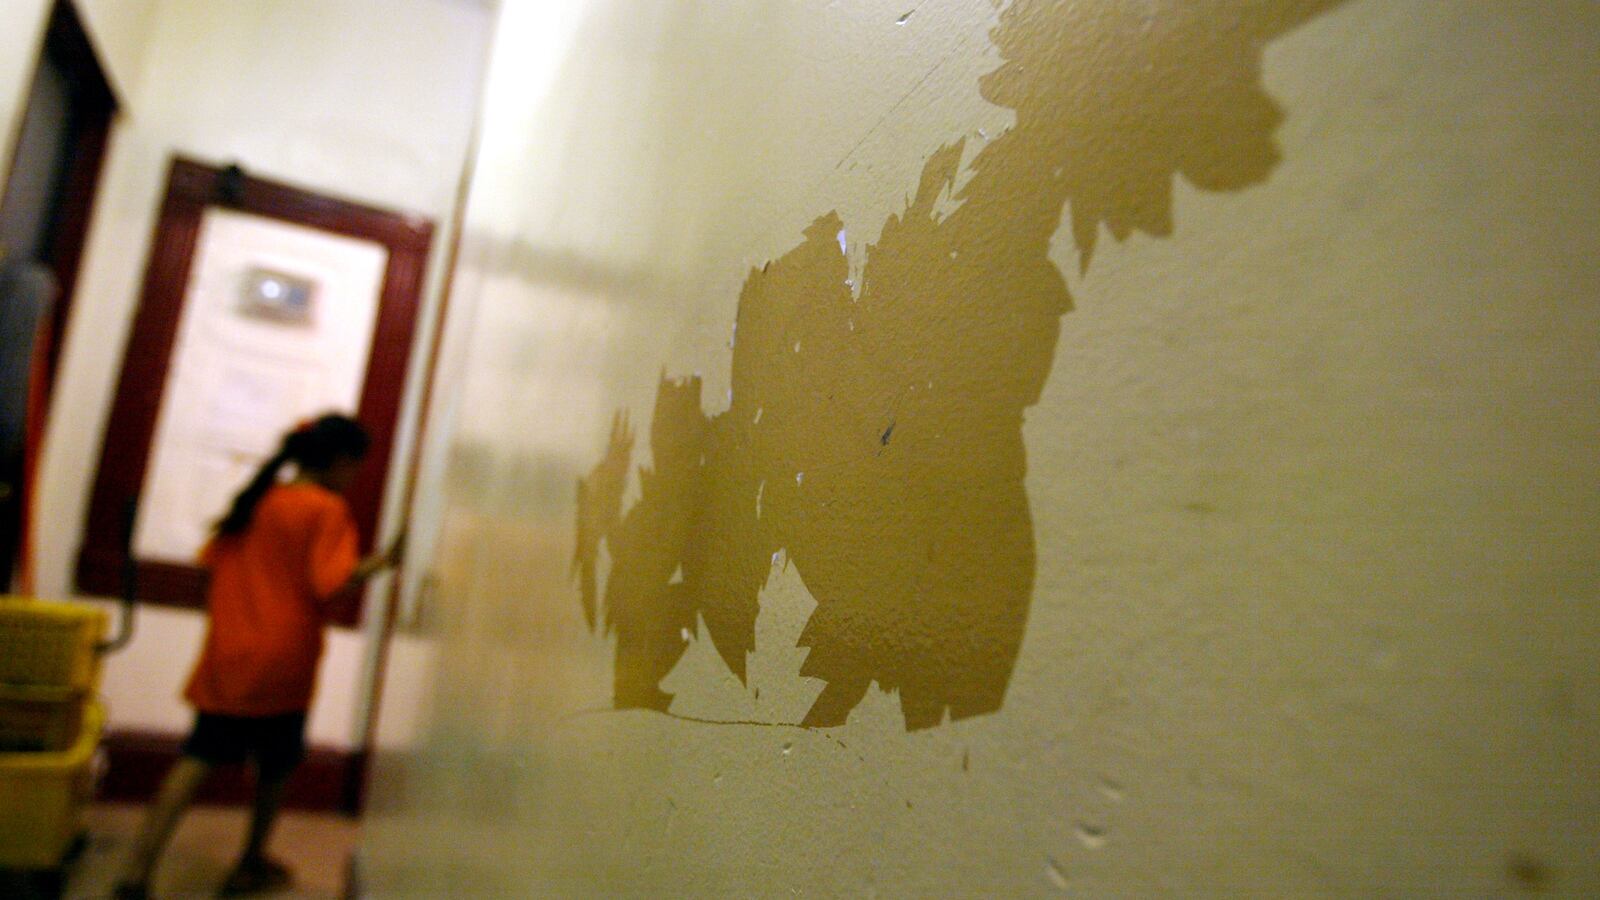 The New York City Housing Authority announced it will check for lead paint in community centers with programs serving young children.